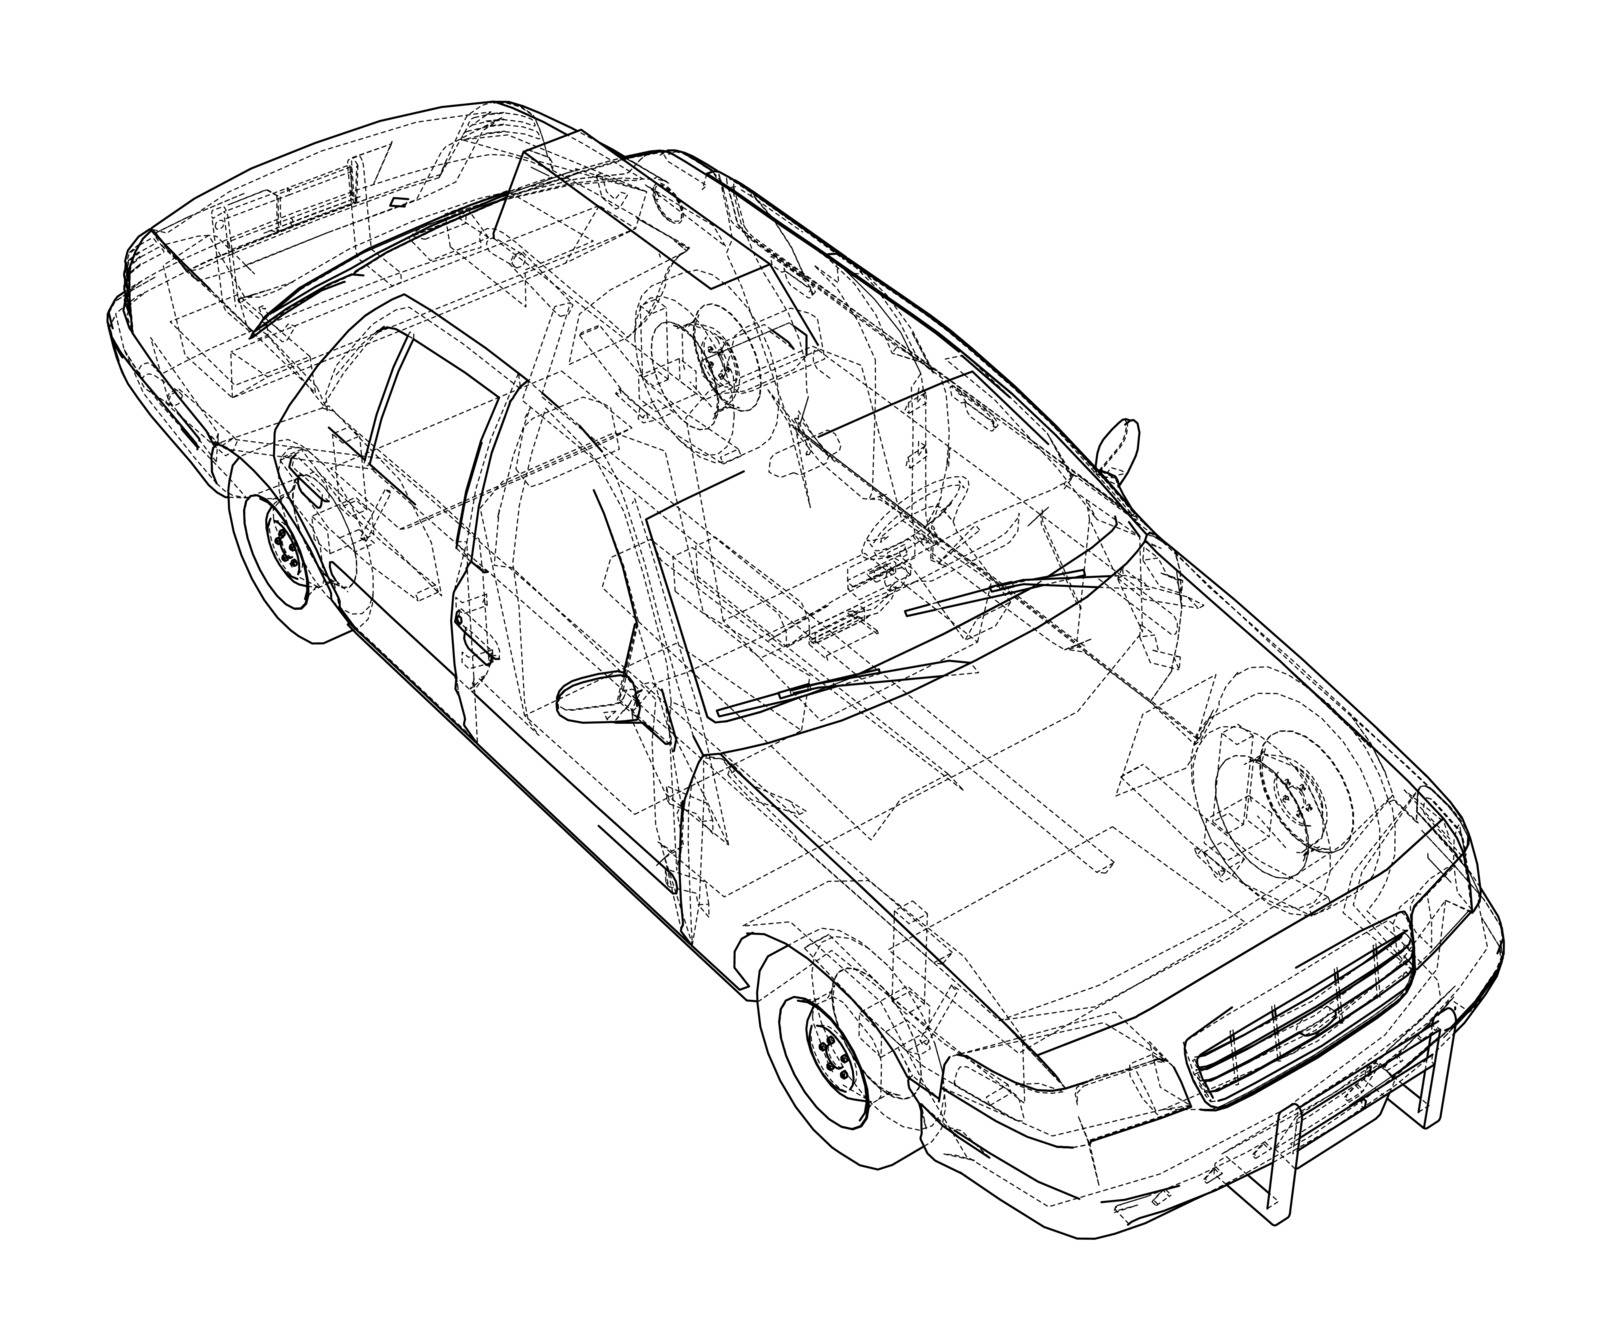 Taxi outline drawing. Vector rendering of 3d. The layers of visible and invisible lines are separated